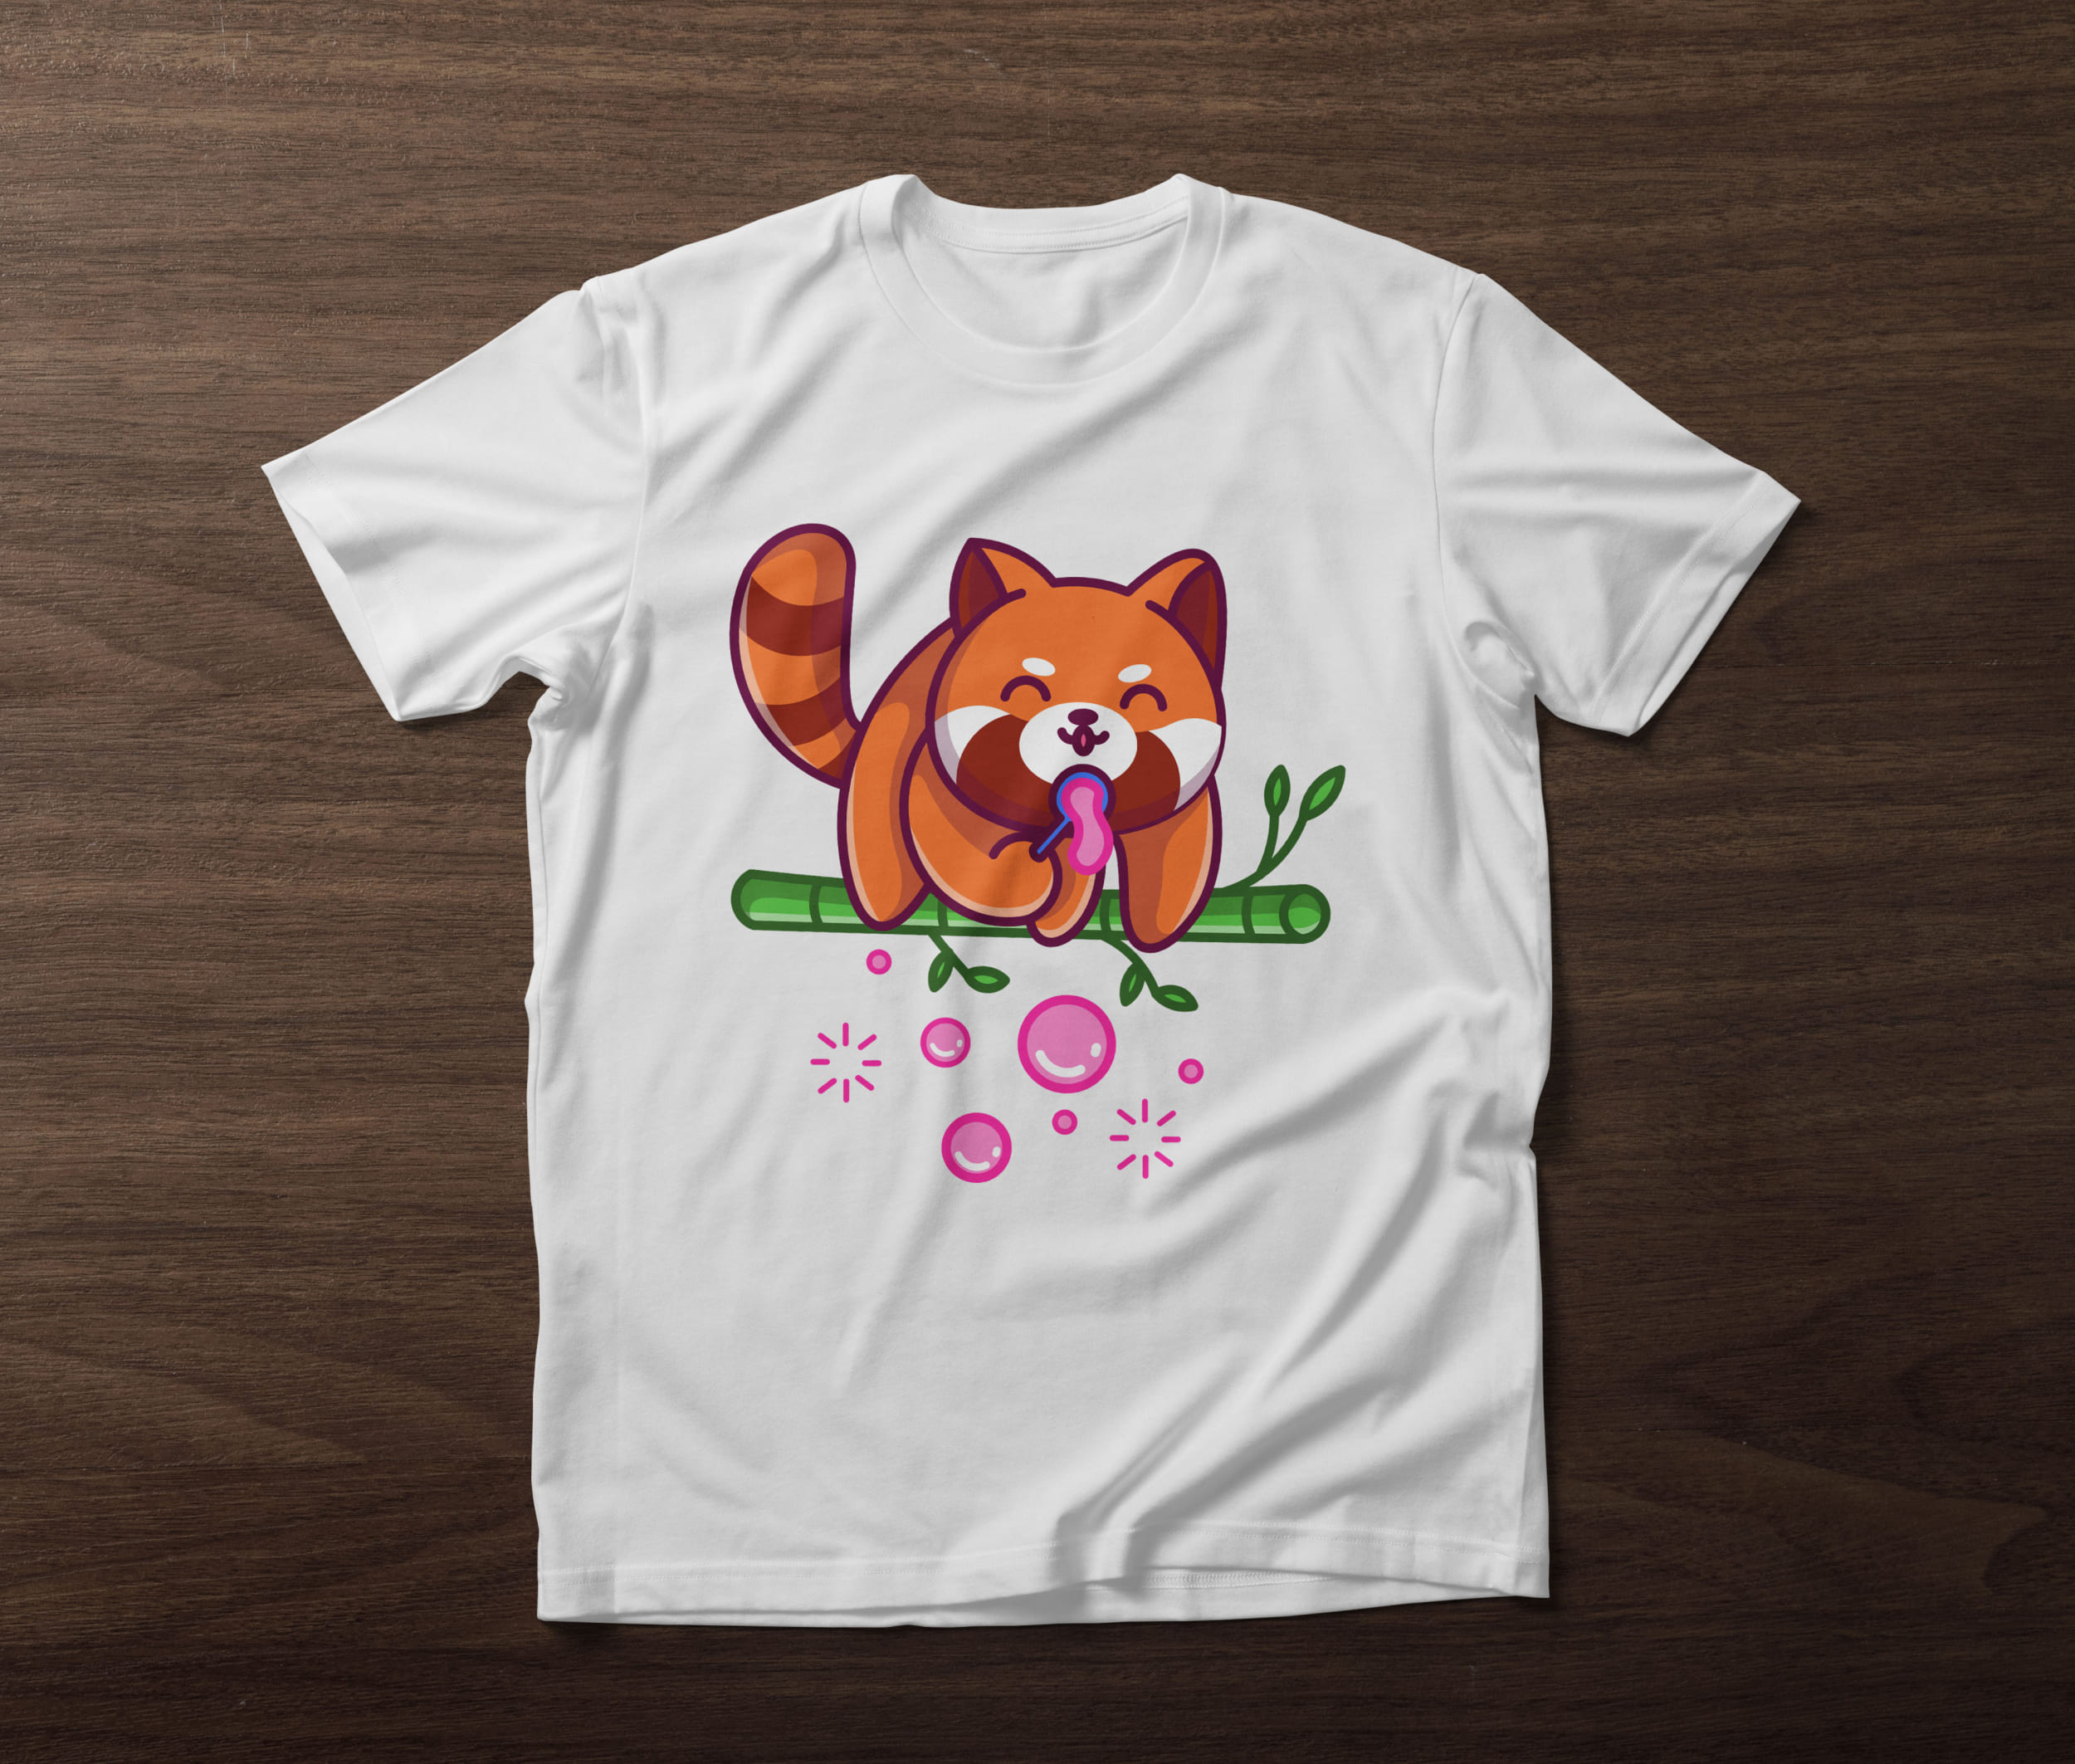 White t-shirt with a red panda and bubble blowers on a wooden background.